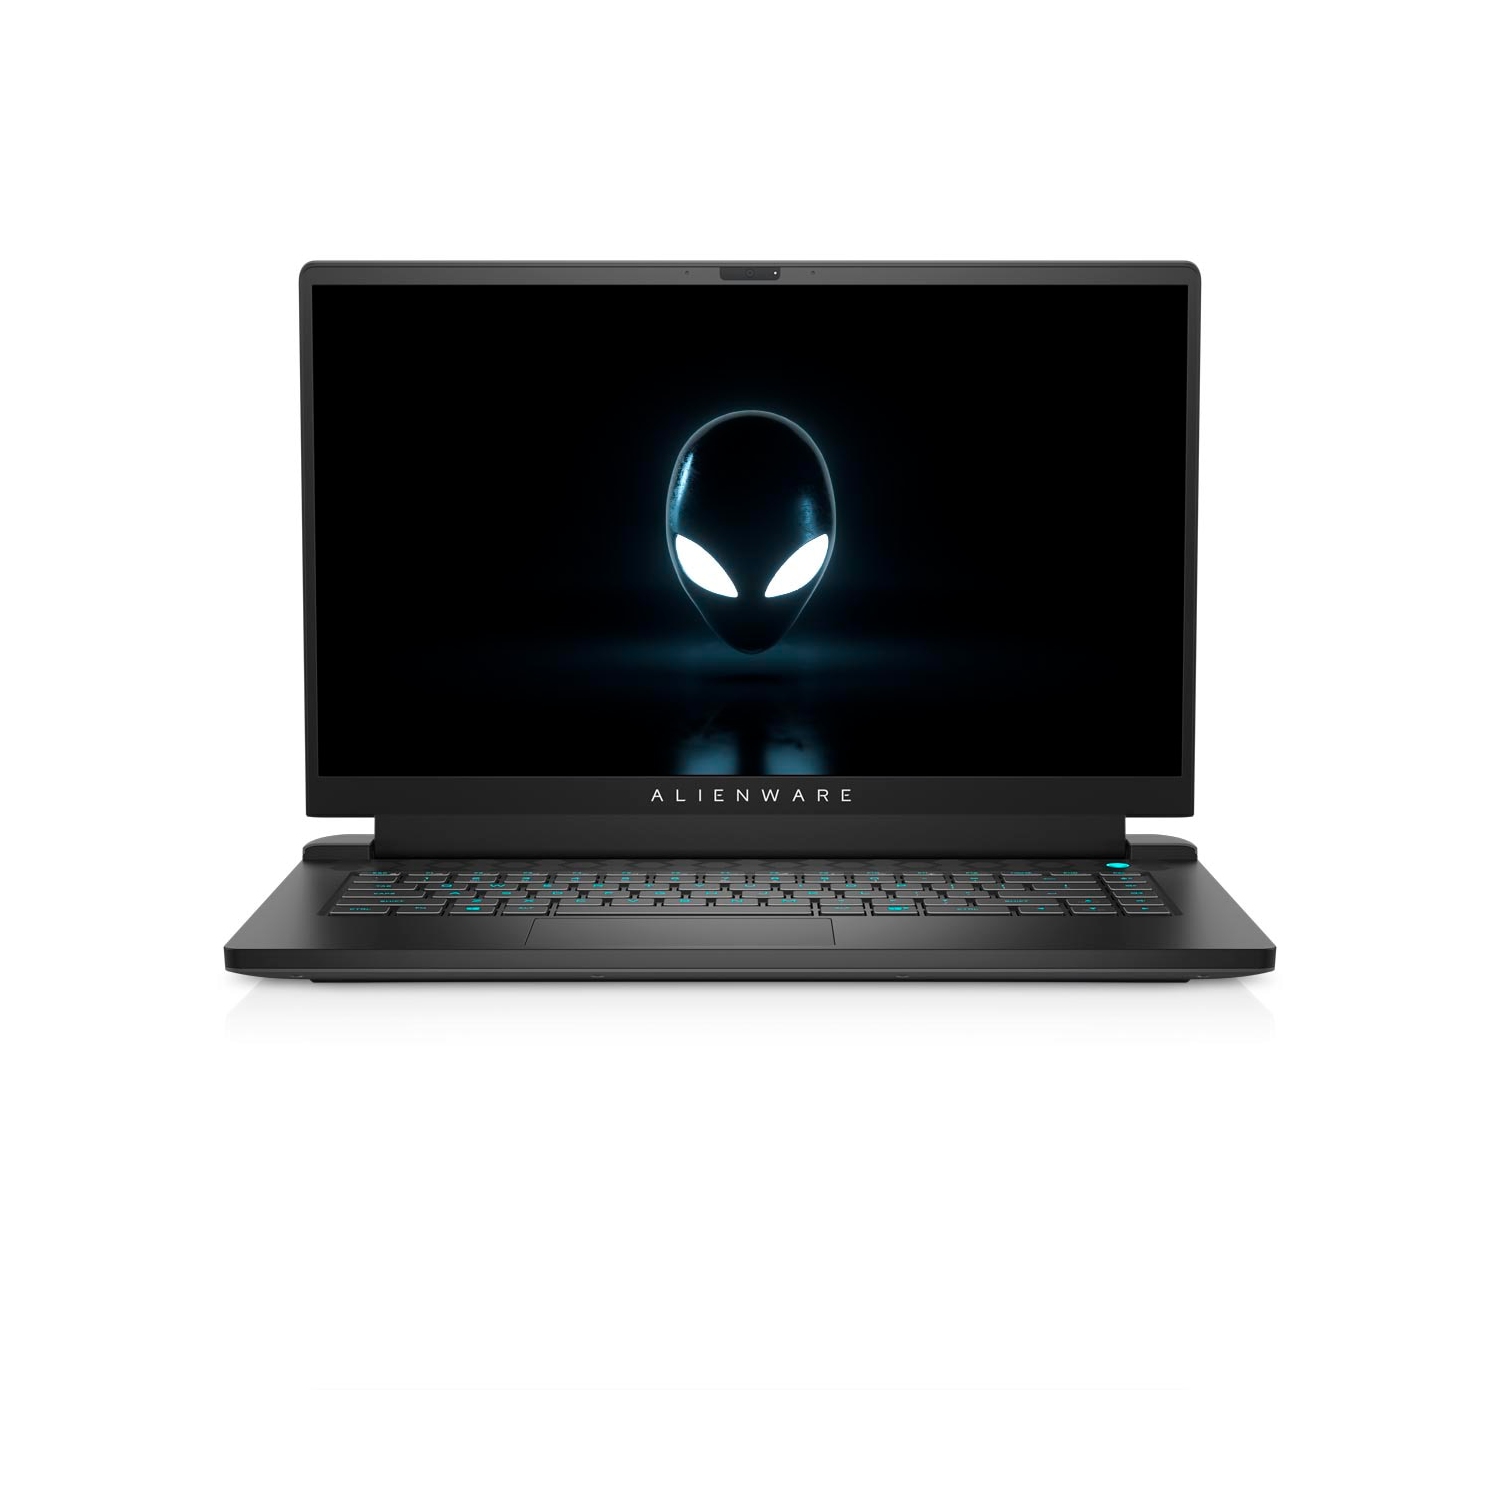 Refurbished (Excellent) - Dell Alienware m15 R5 Ryzen Edition Gaming Laptop (2021), 15.6" FHD, Core Ryzen 7, 512GB SSD, 16GB RAM, RTX 3060, 8 Cores @ 4.4 GHz Certified